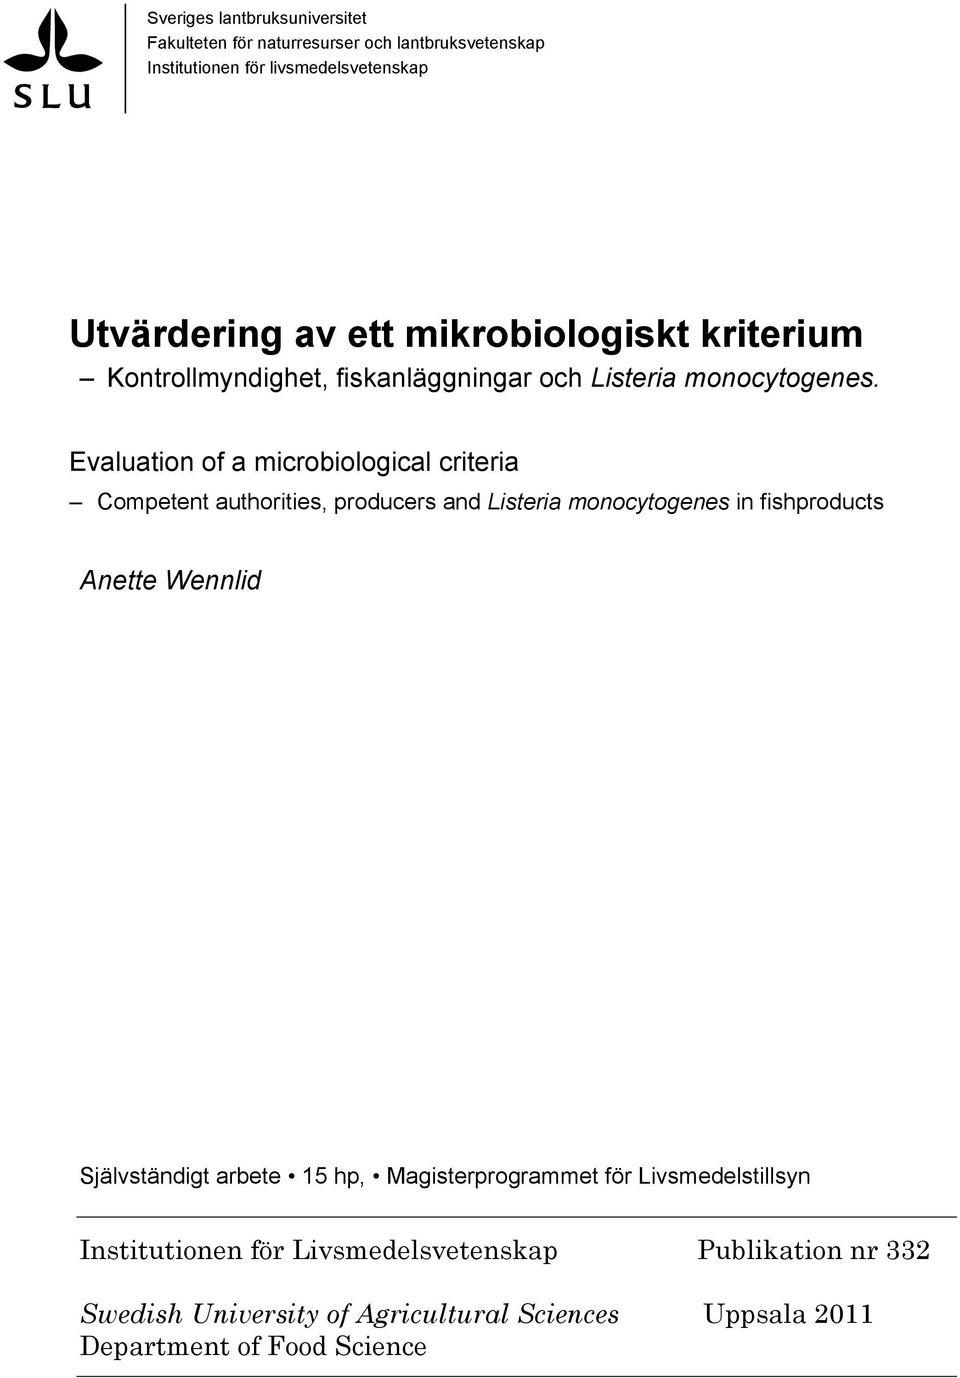 Evaluation of a microbiological criteria Competent authorities, producers and Listeria monocytogenes in fishproducts Anette Wennlid